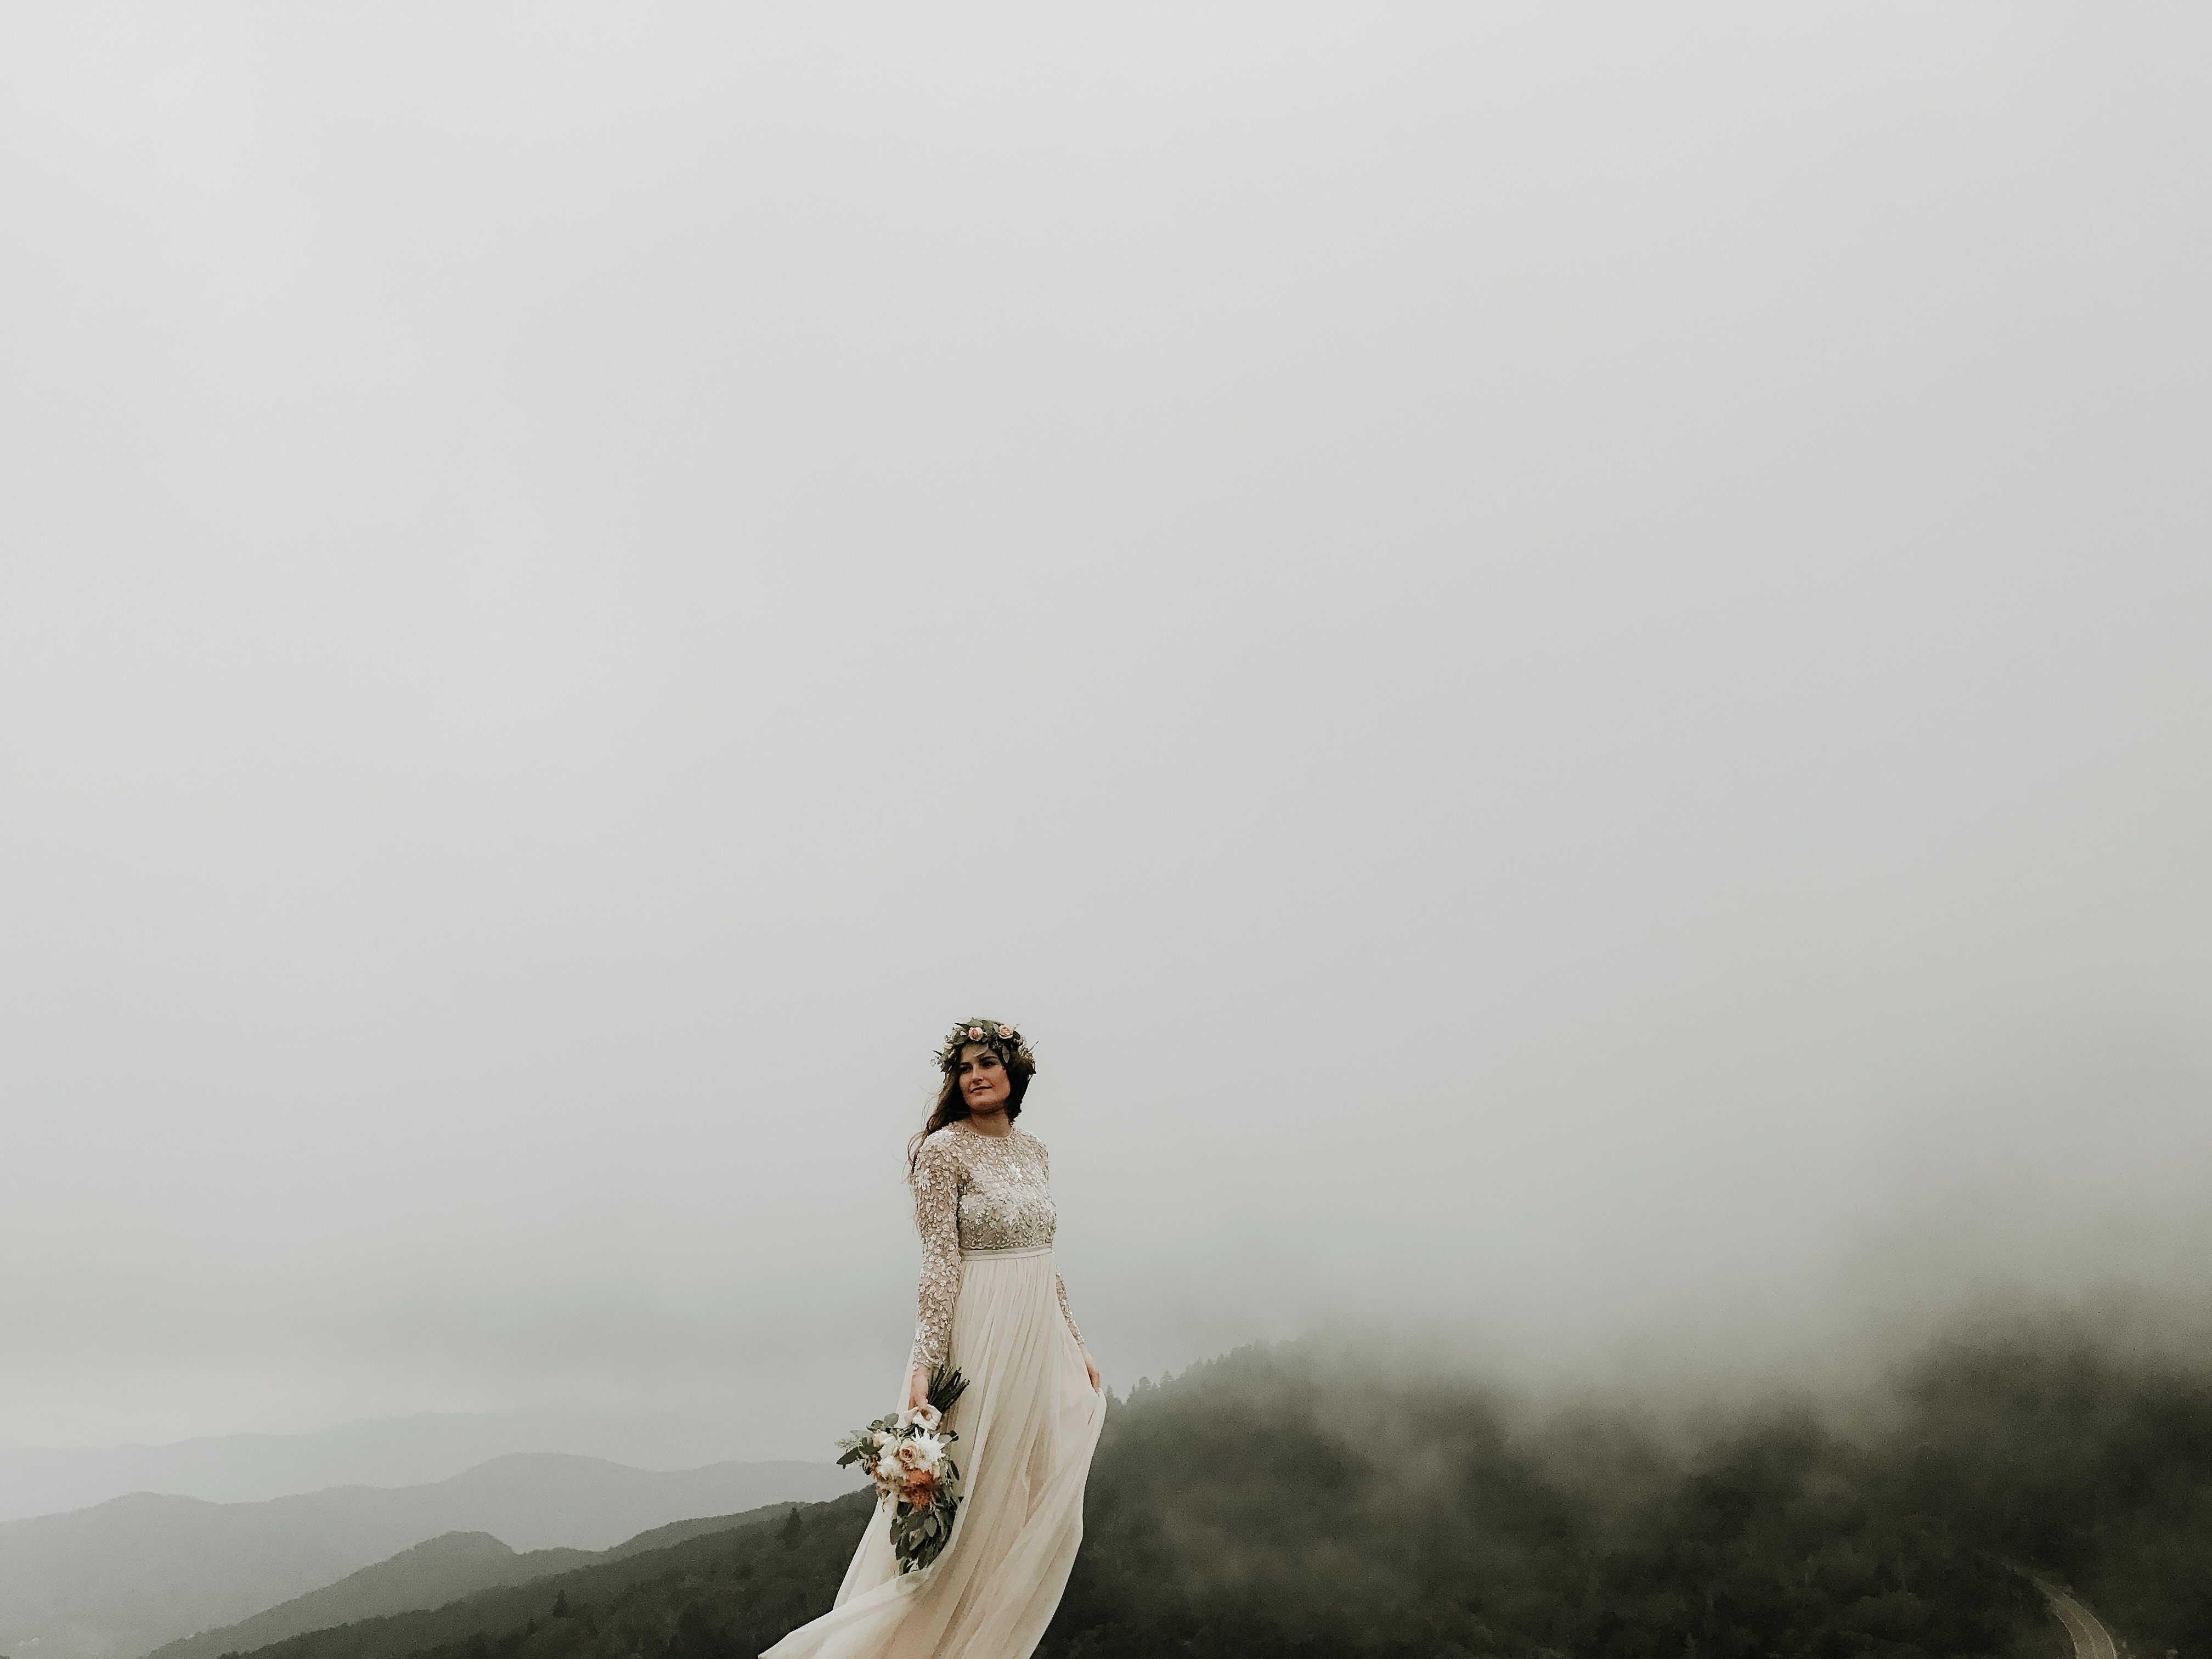 4032x3024 wedding, solitude, mountain, elopement, tennessee, lace, bridal, mystical, north carolina, alone, romantic, bouquet, Free picture, flower crown, fog, overlook, bride, marriage Gallery HD Wallpaper